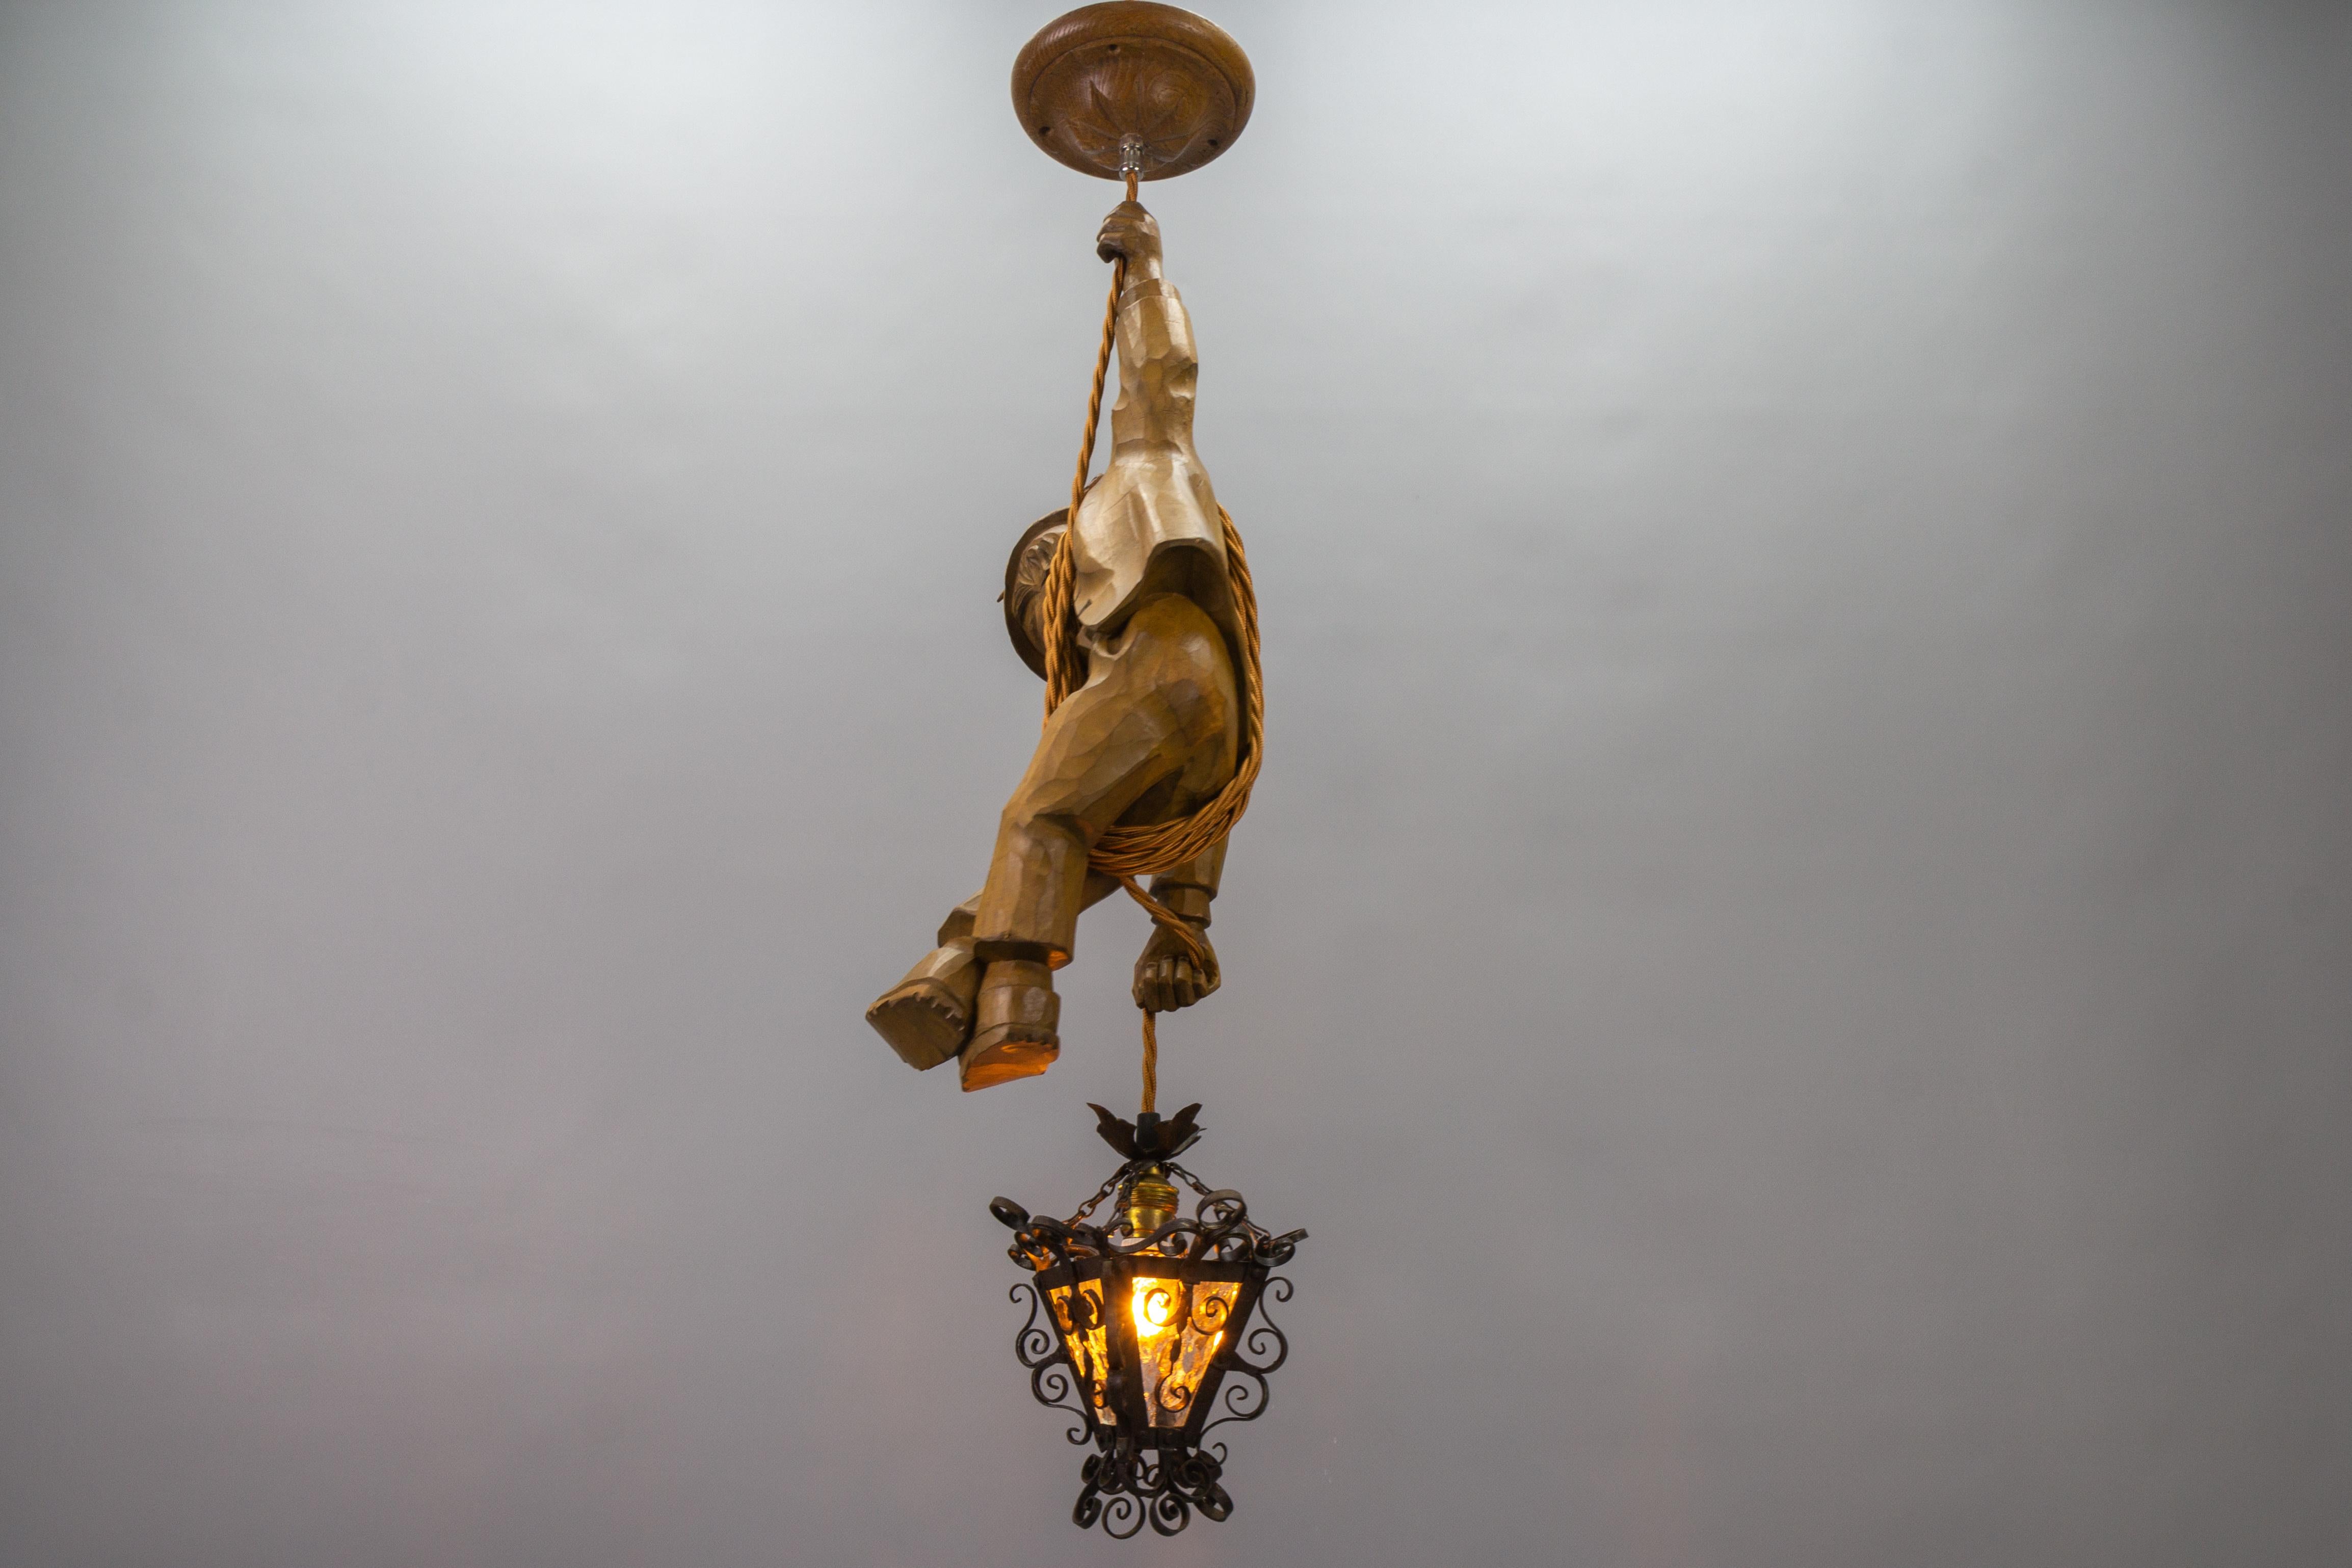 German Pendant Light Hand Carved Wooden Figure Mountain Climber with Lantern For Sale 5